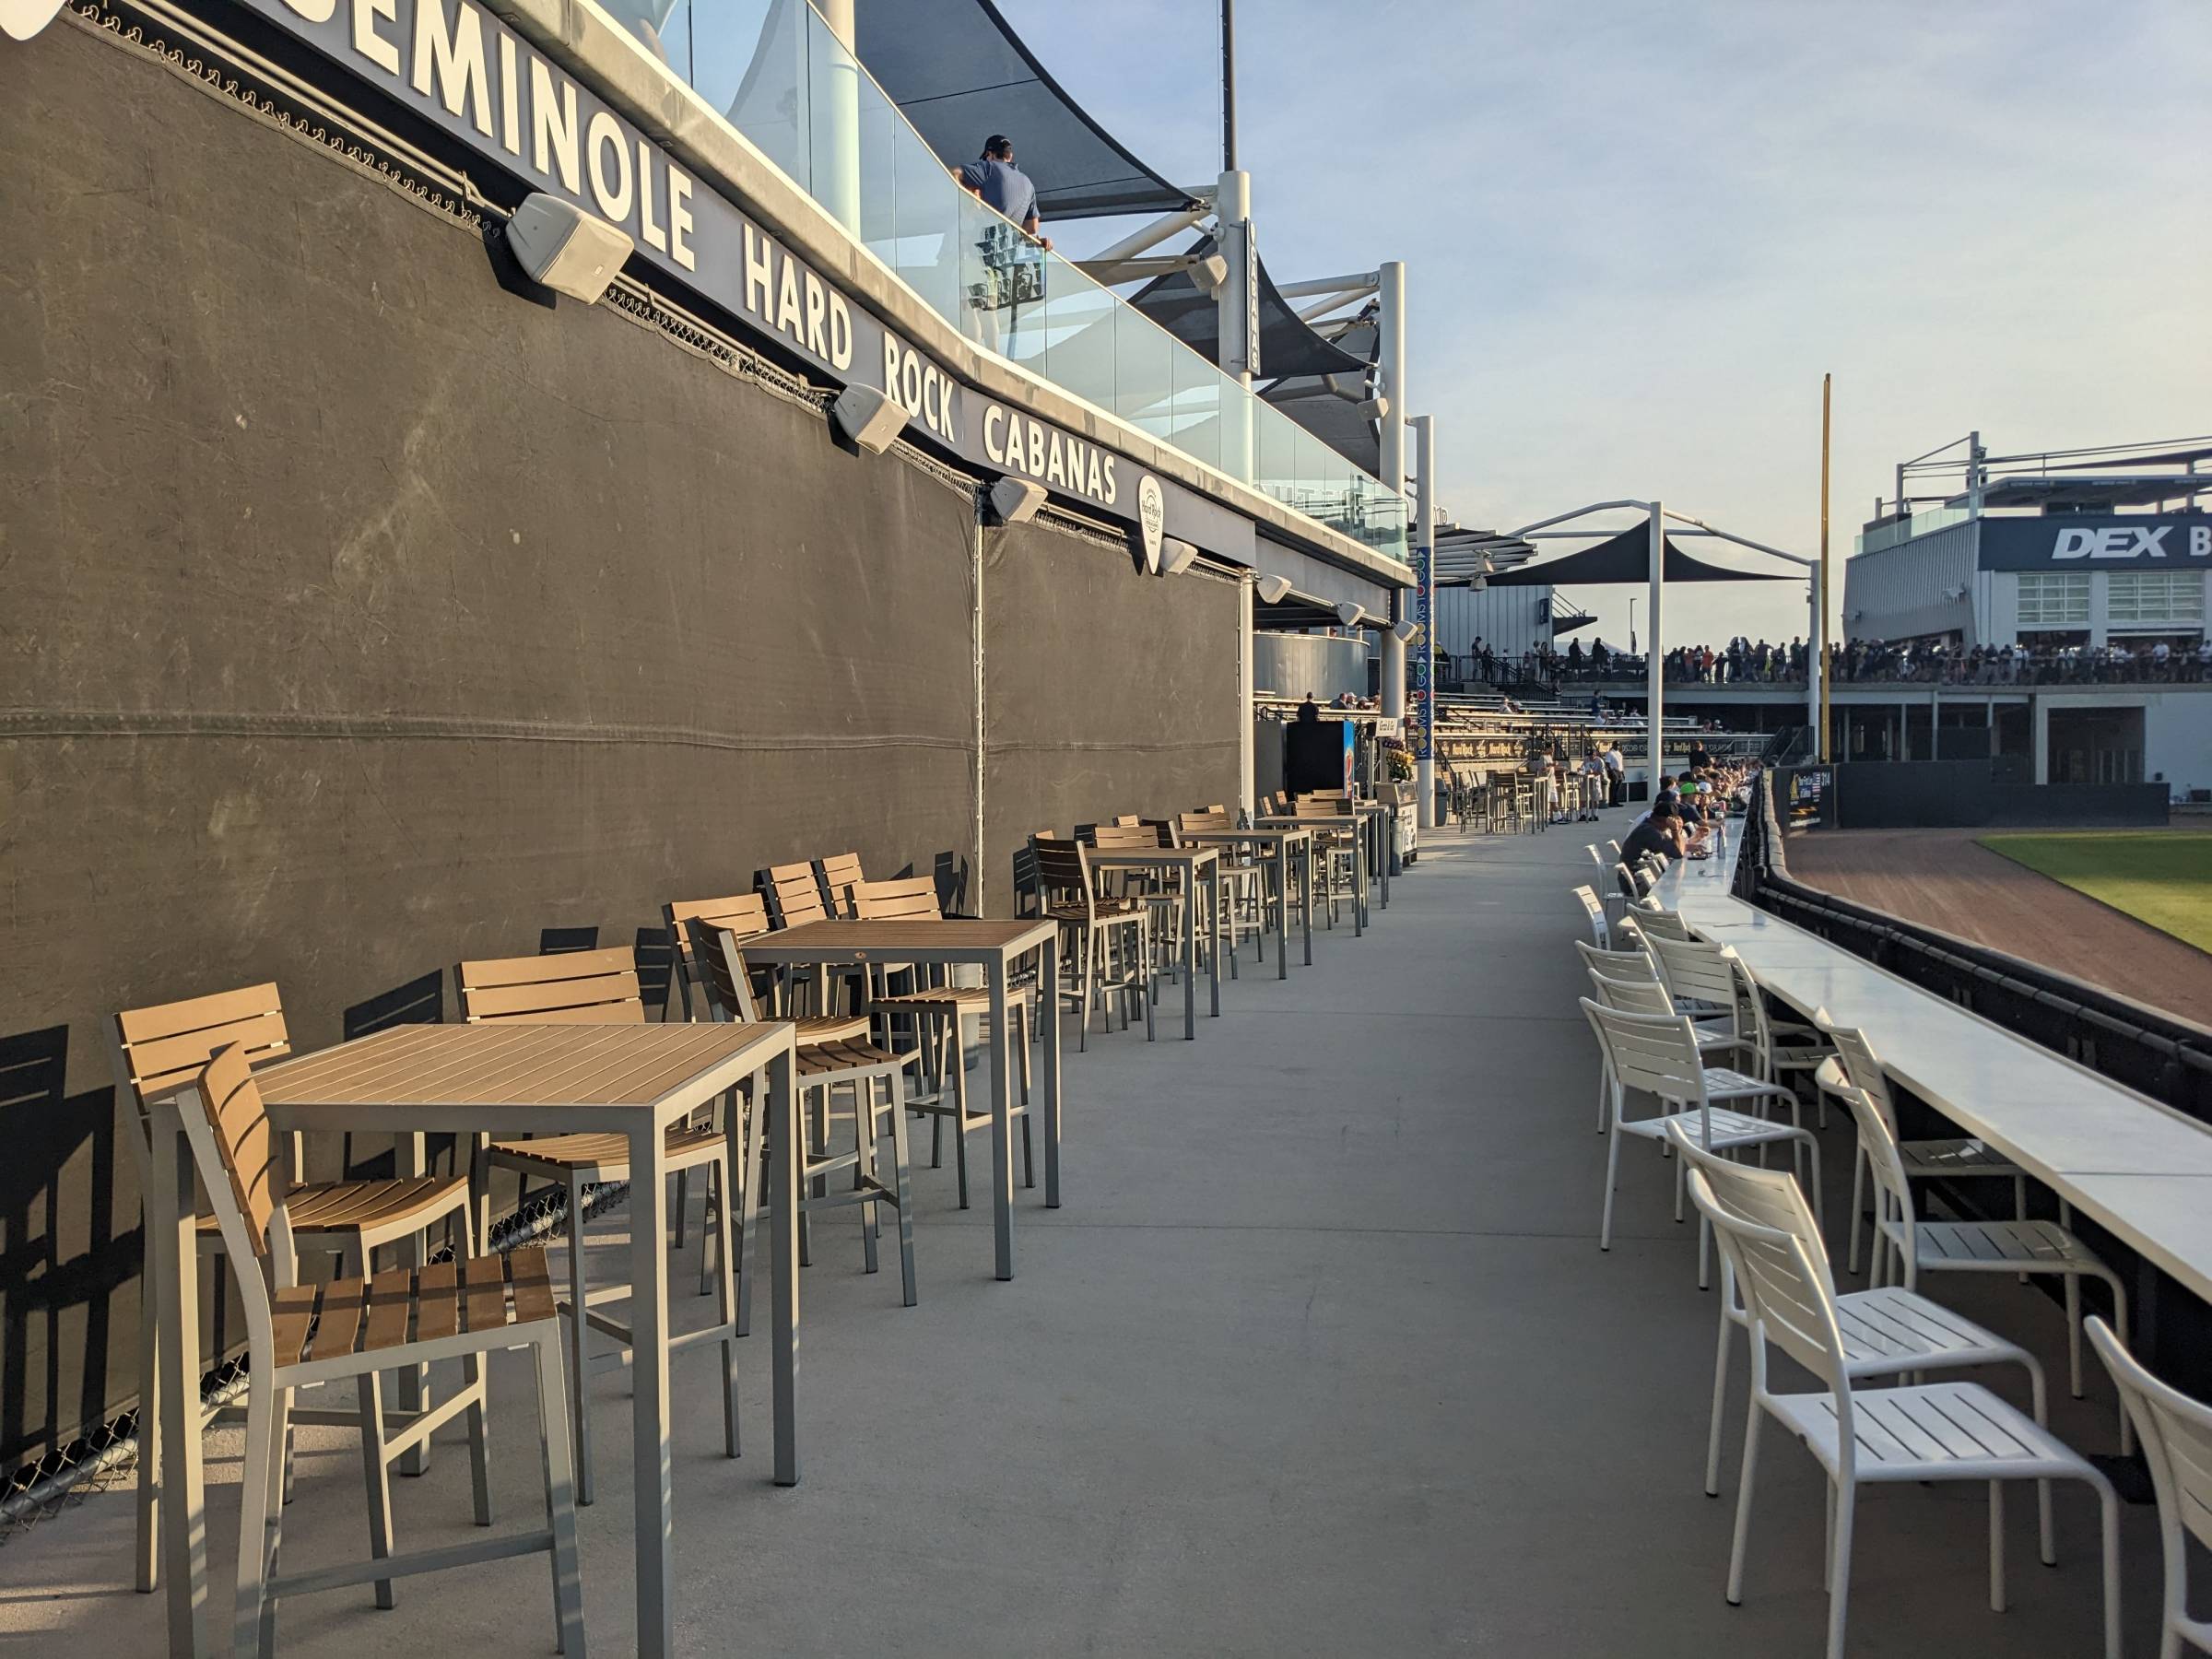 right field tables